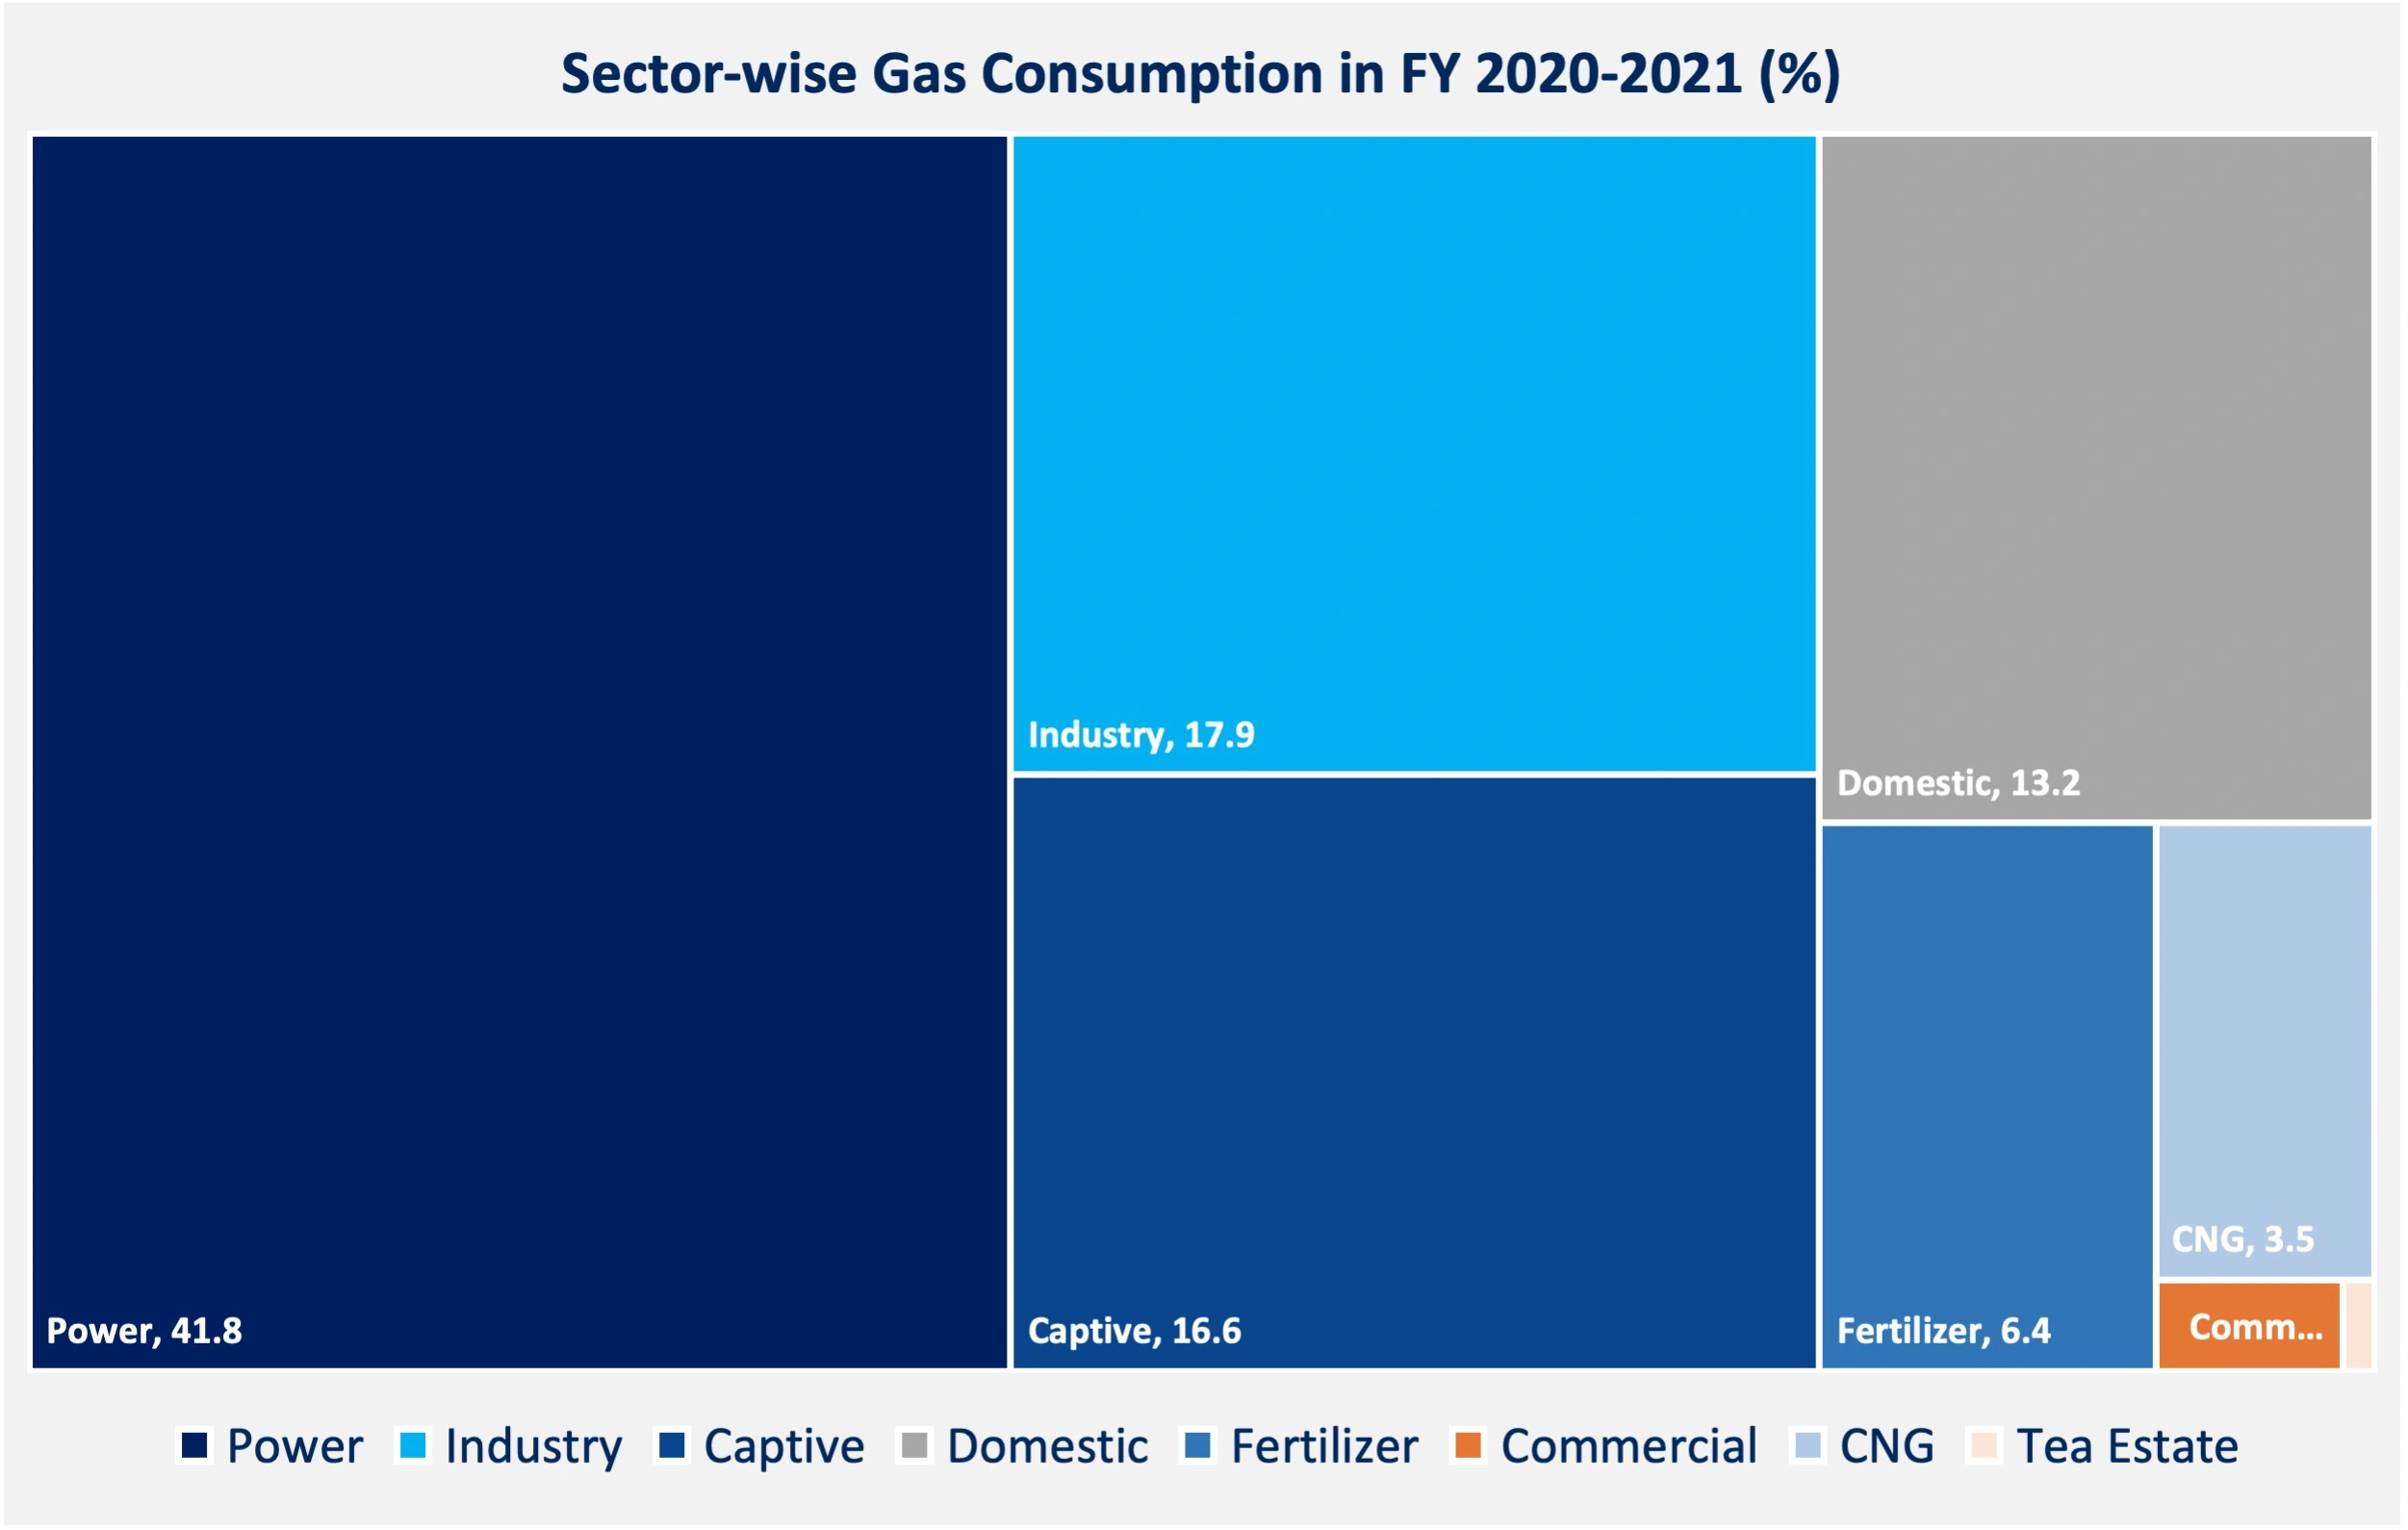 Sector-wise Gas Consumption in FY 2020-2021